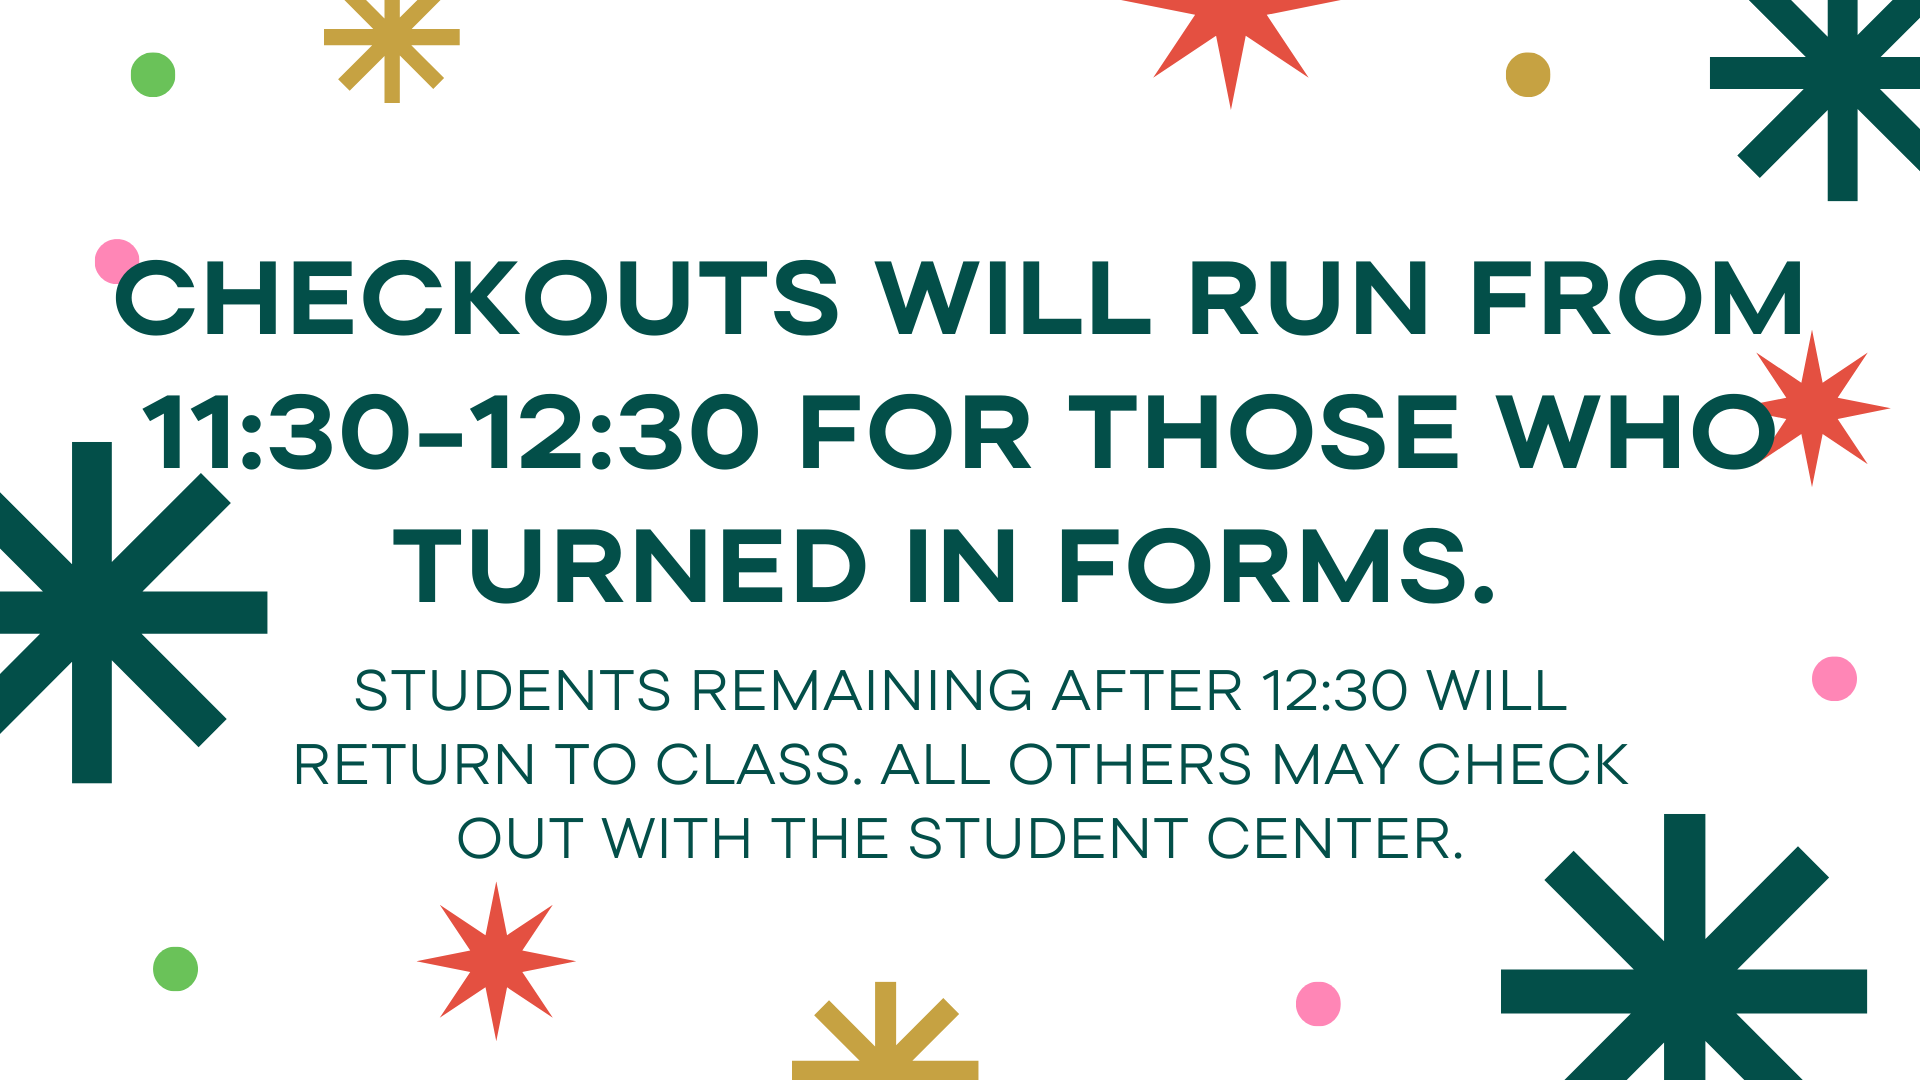 Checkouts will run from 11:30-12:30 for those who turned in forms. Checkouts will run from 11:30-12:30 for those who turned in forms. 